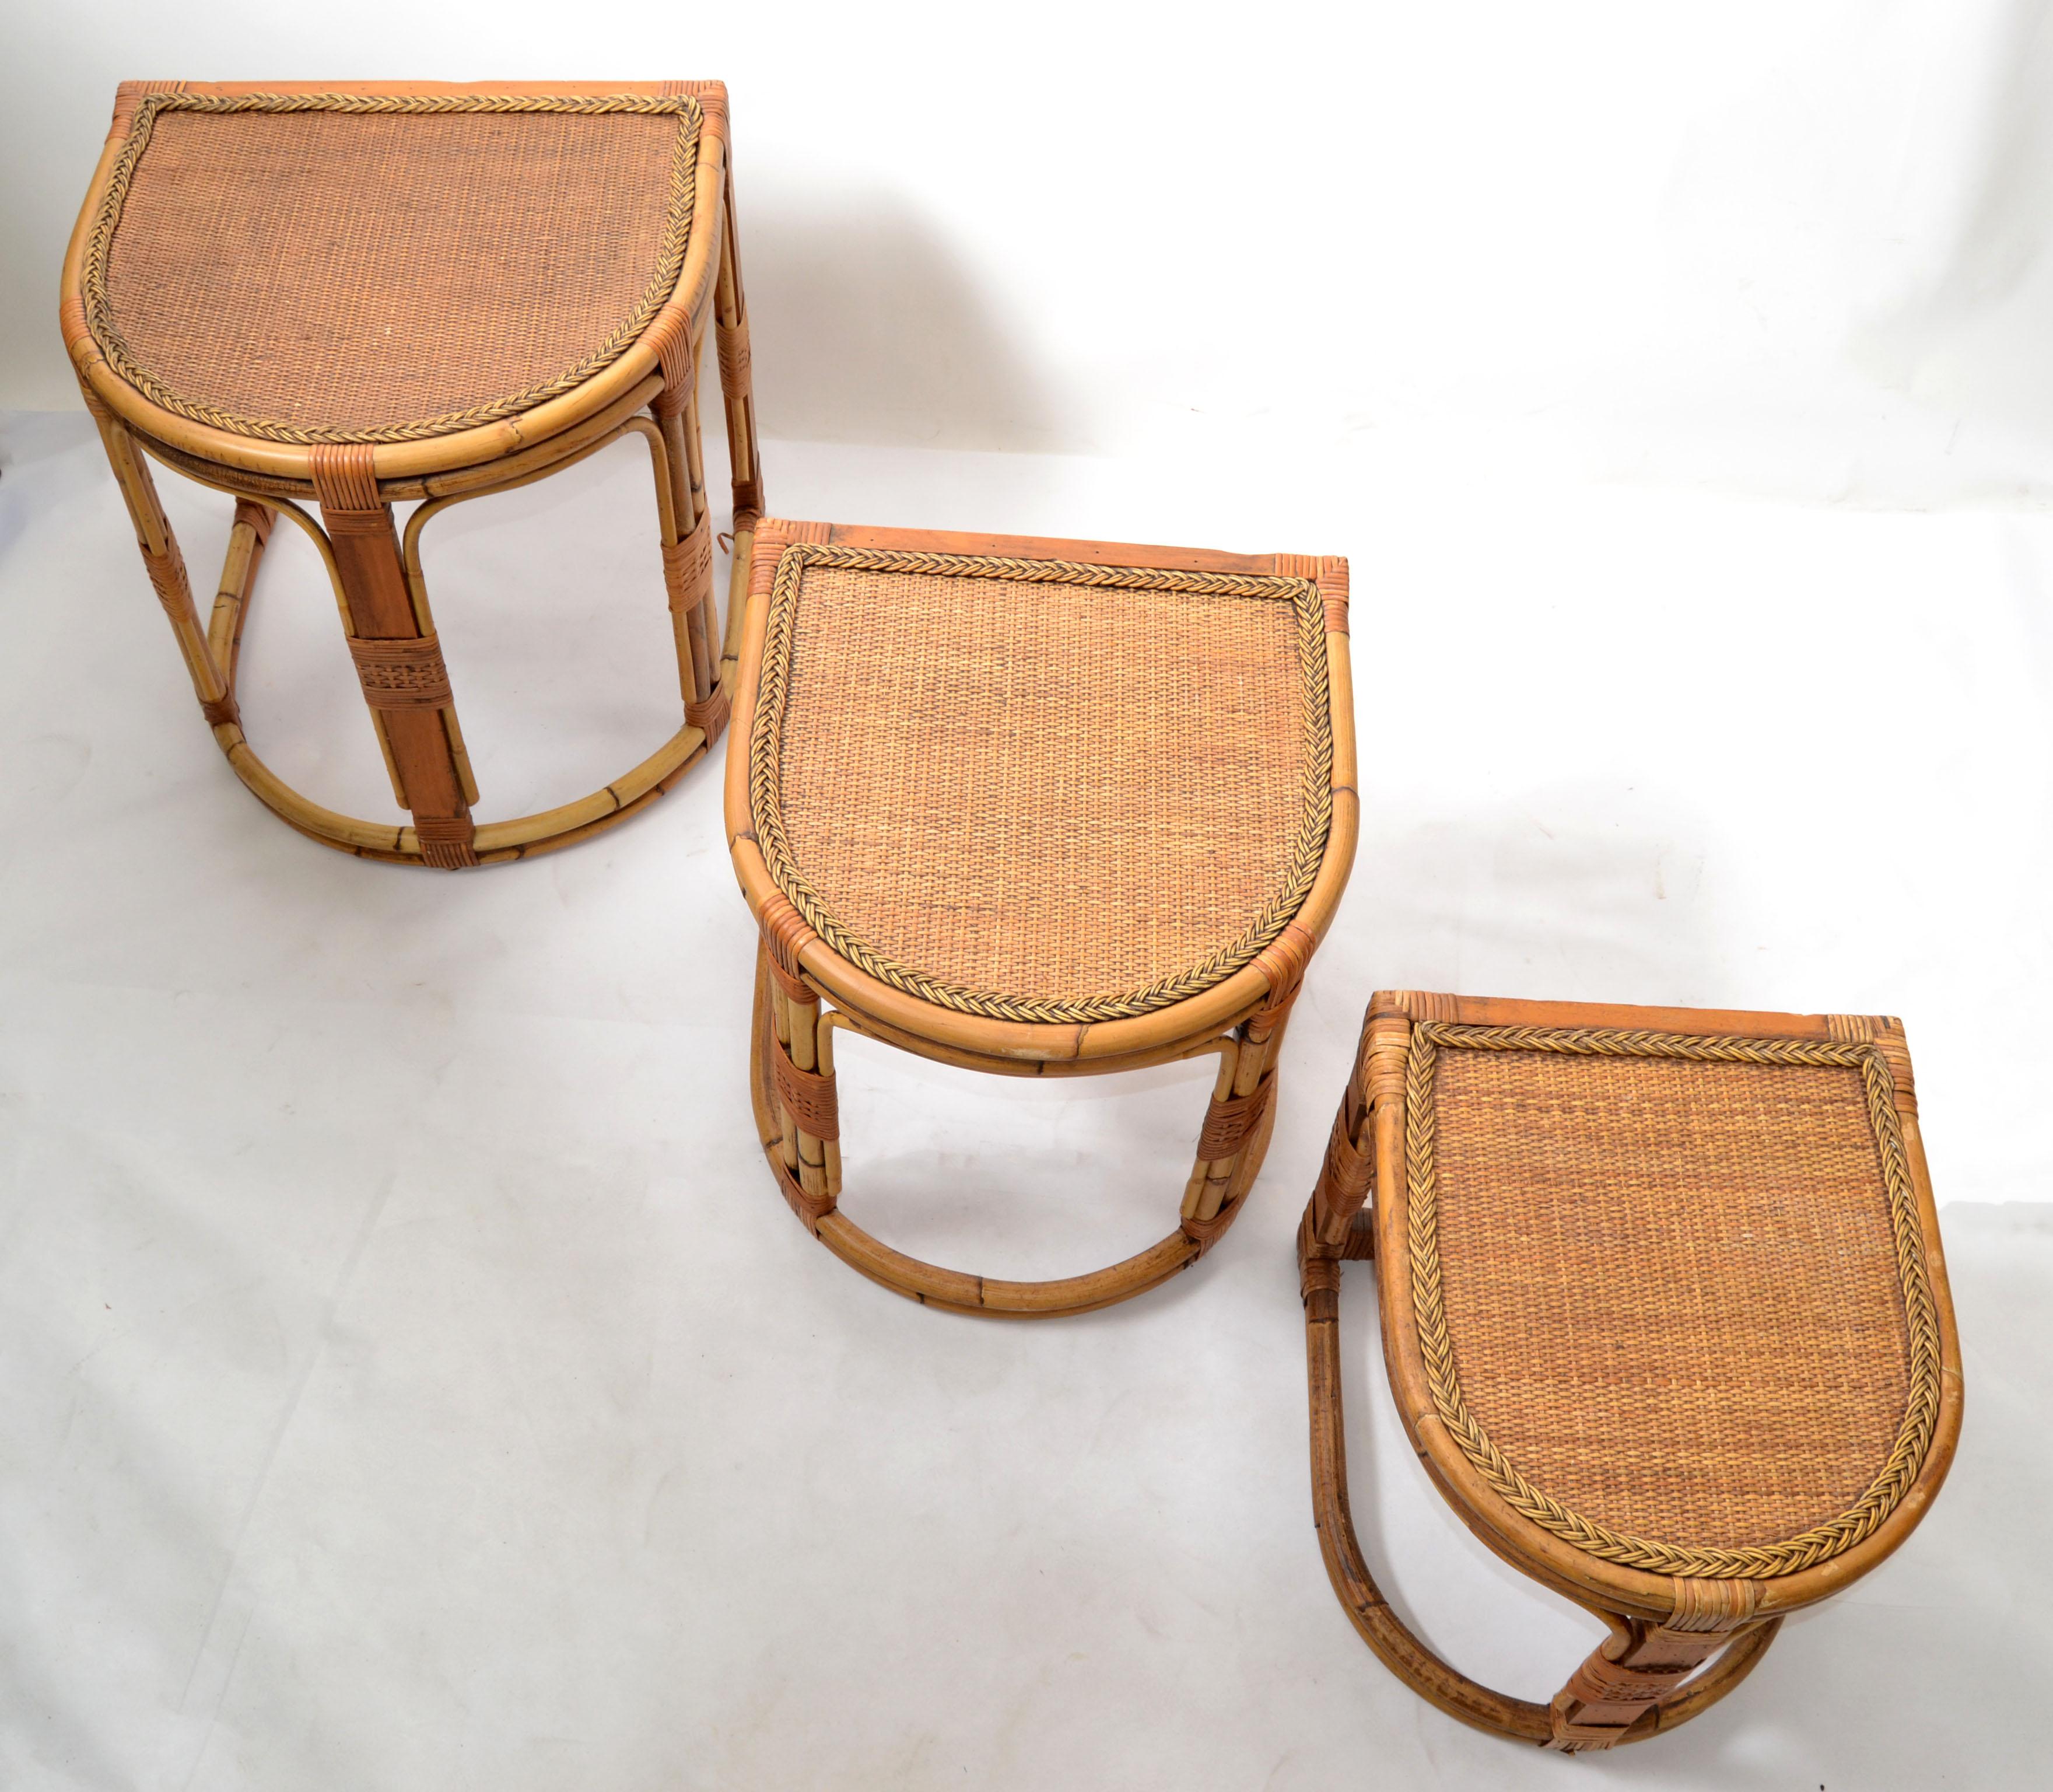 Hand-Crafted Semi-Circle Bamboo & Cane Nesting Tables / Stacking Tables Handcrafted, Set of 3 For Sale